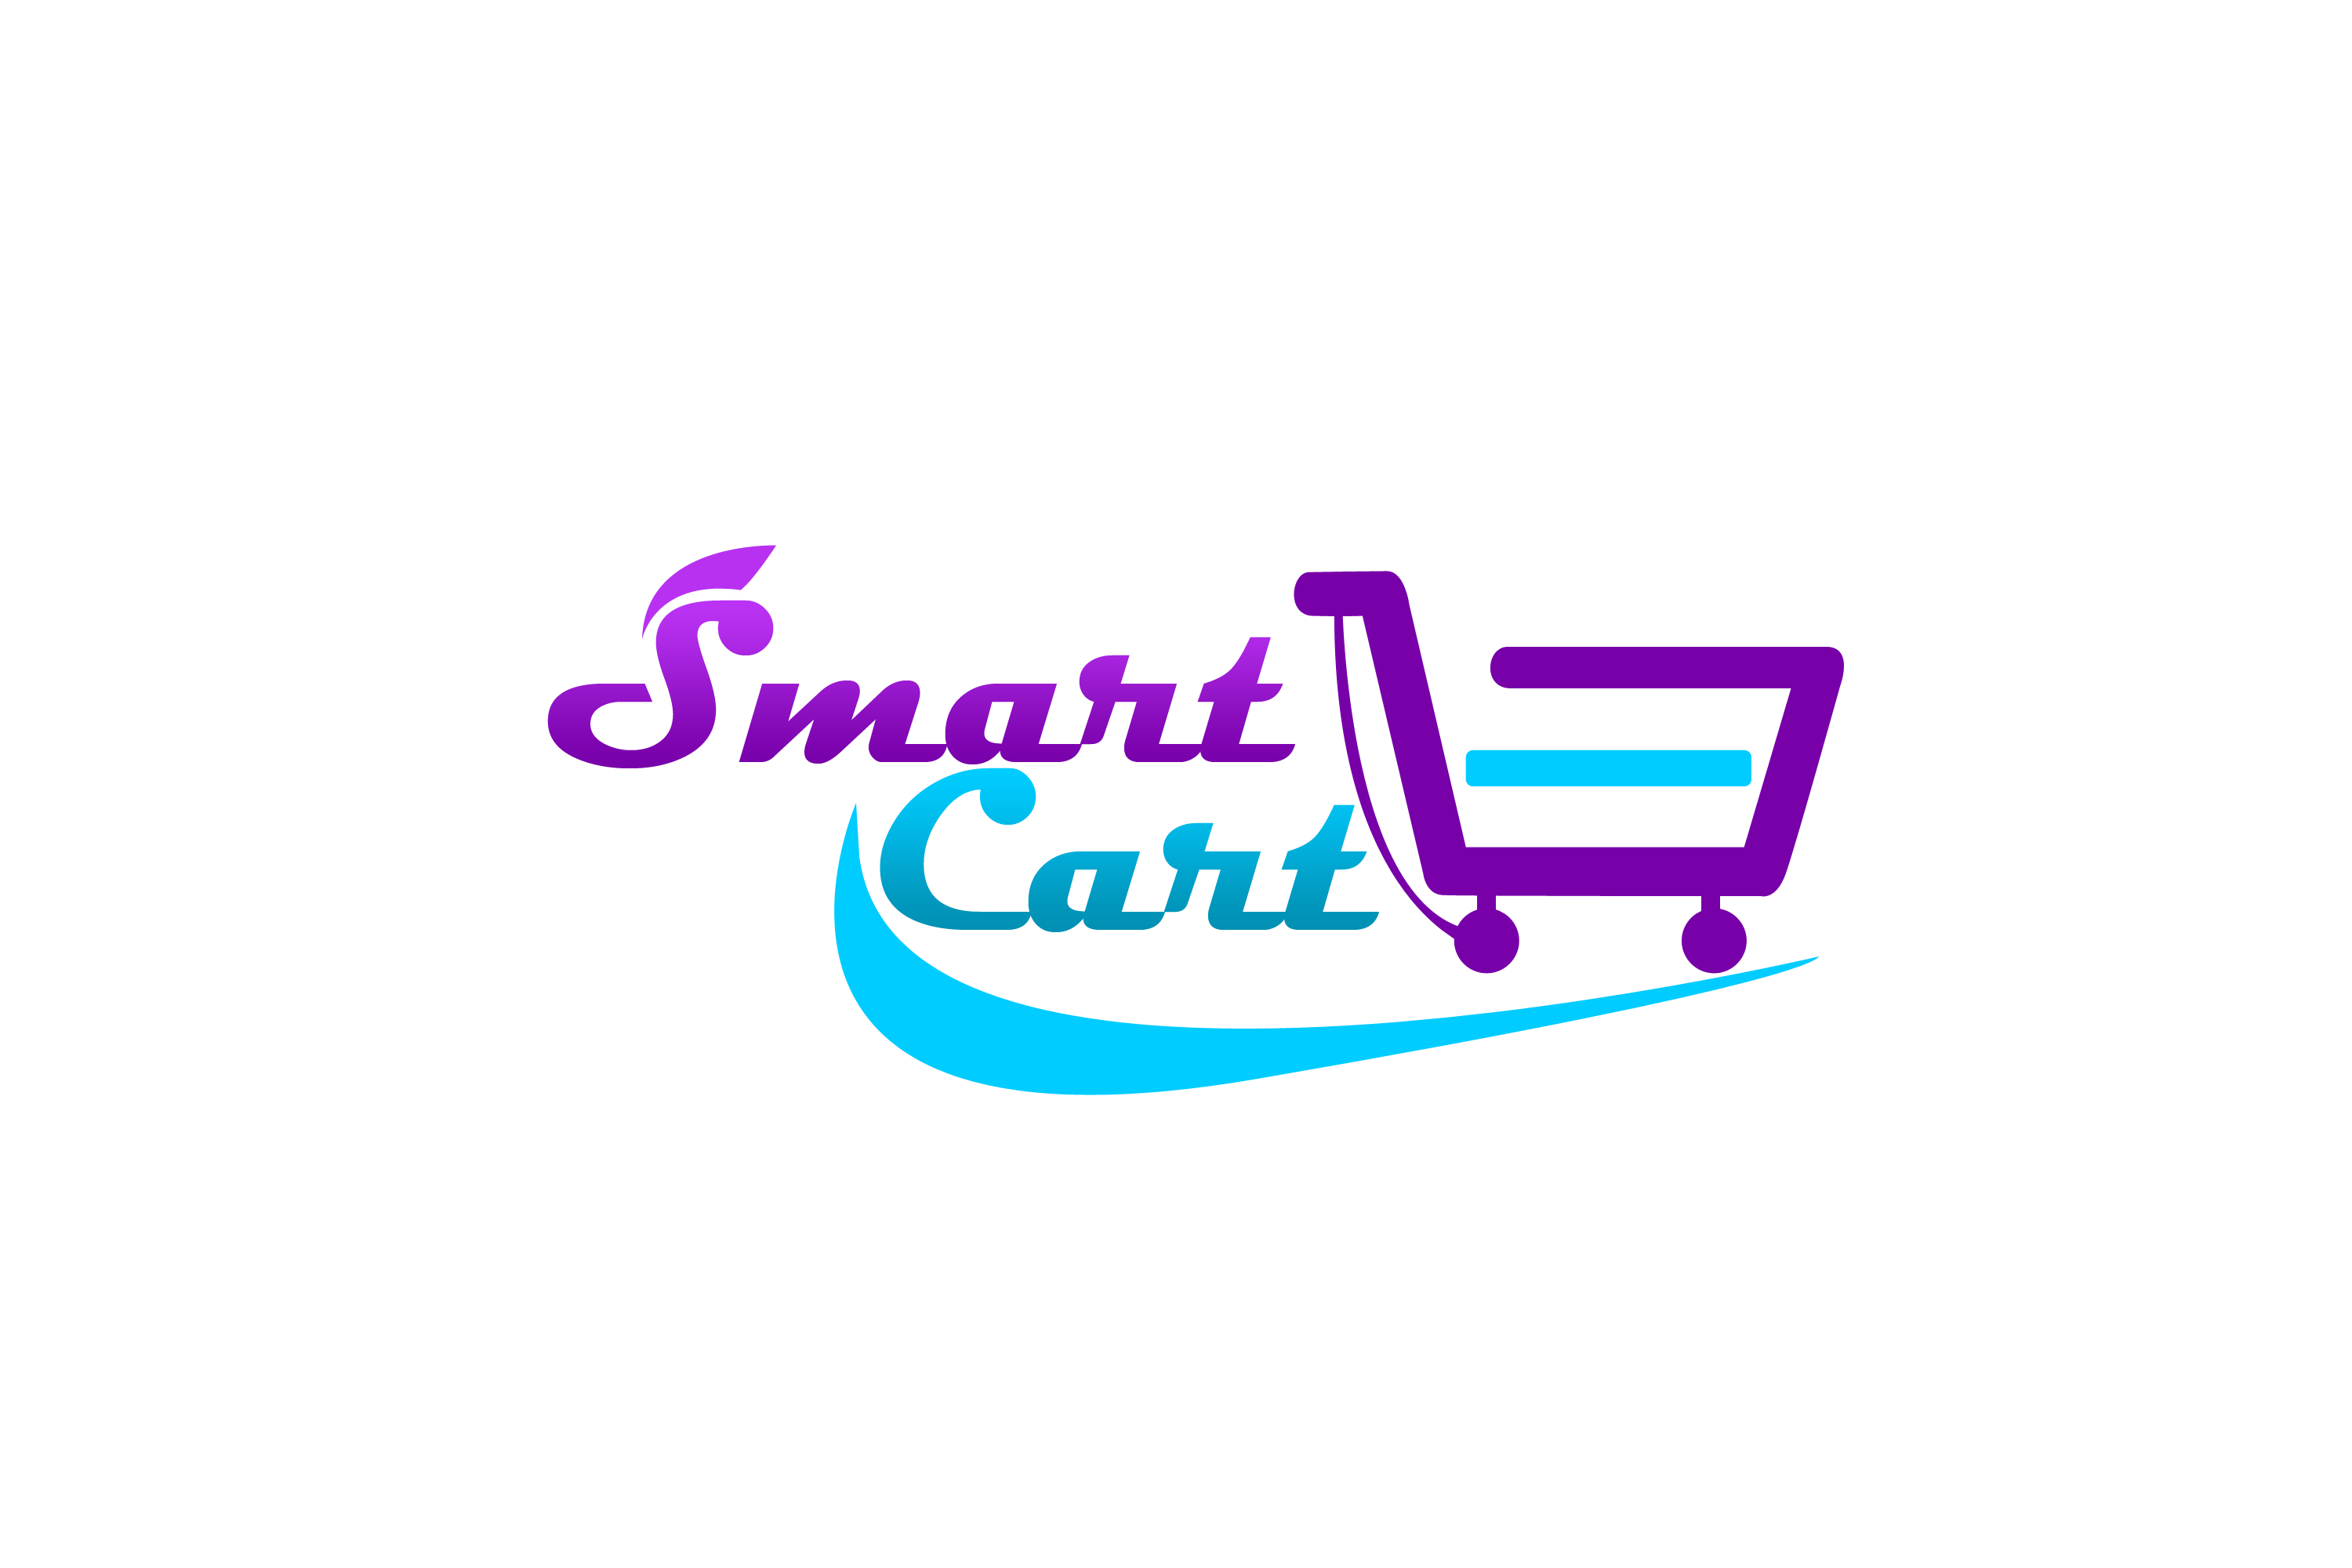 Smart Cart improves the safety and efficiency of shopping carts.